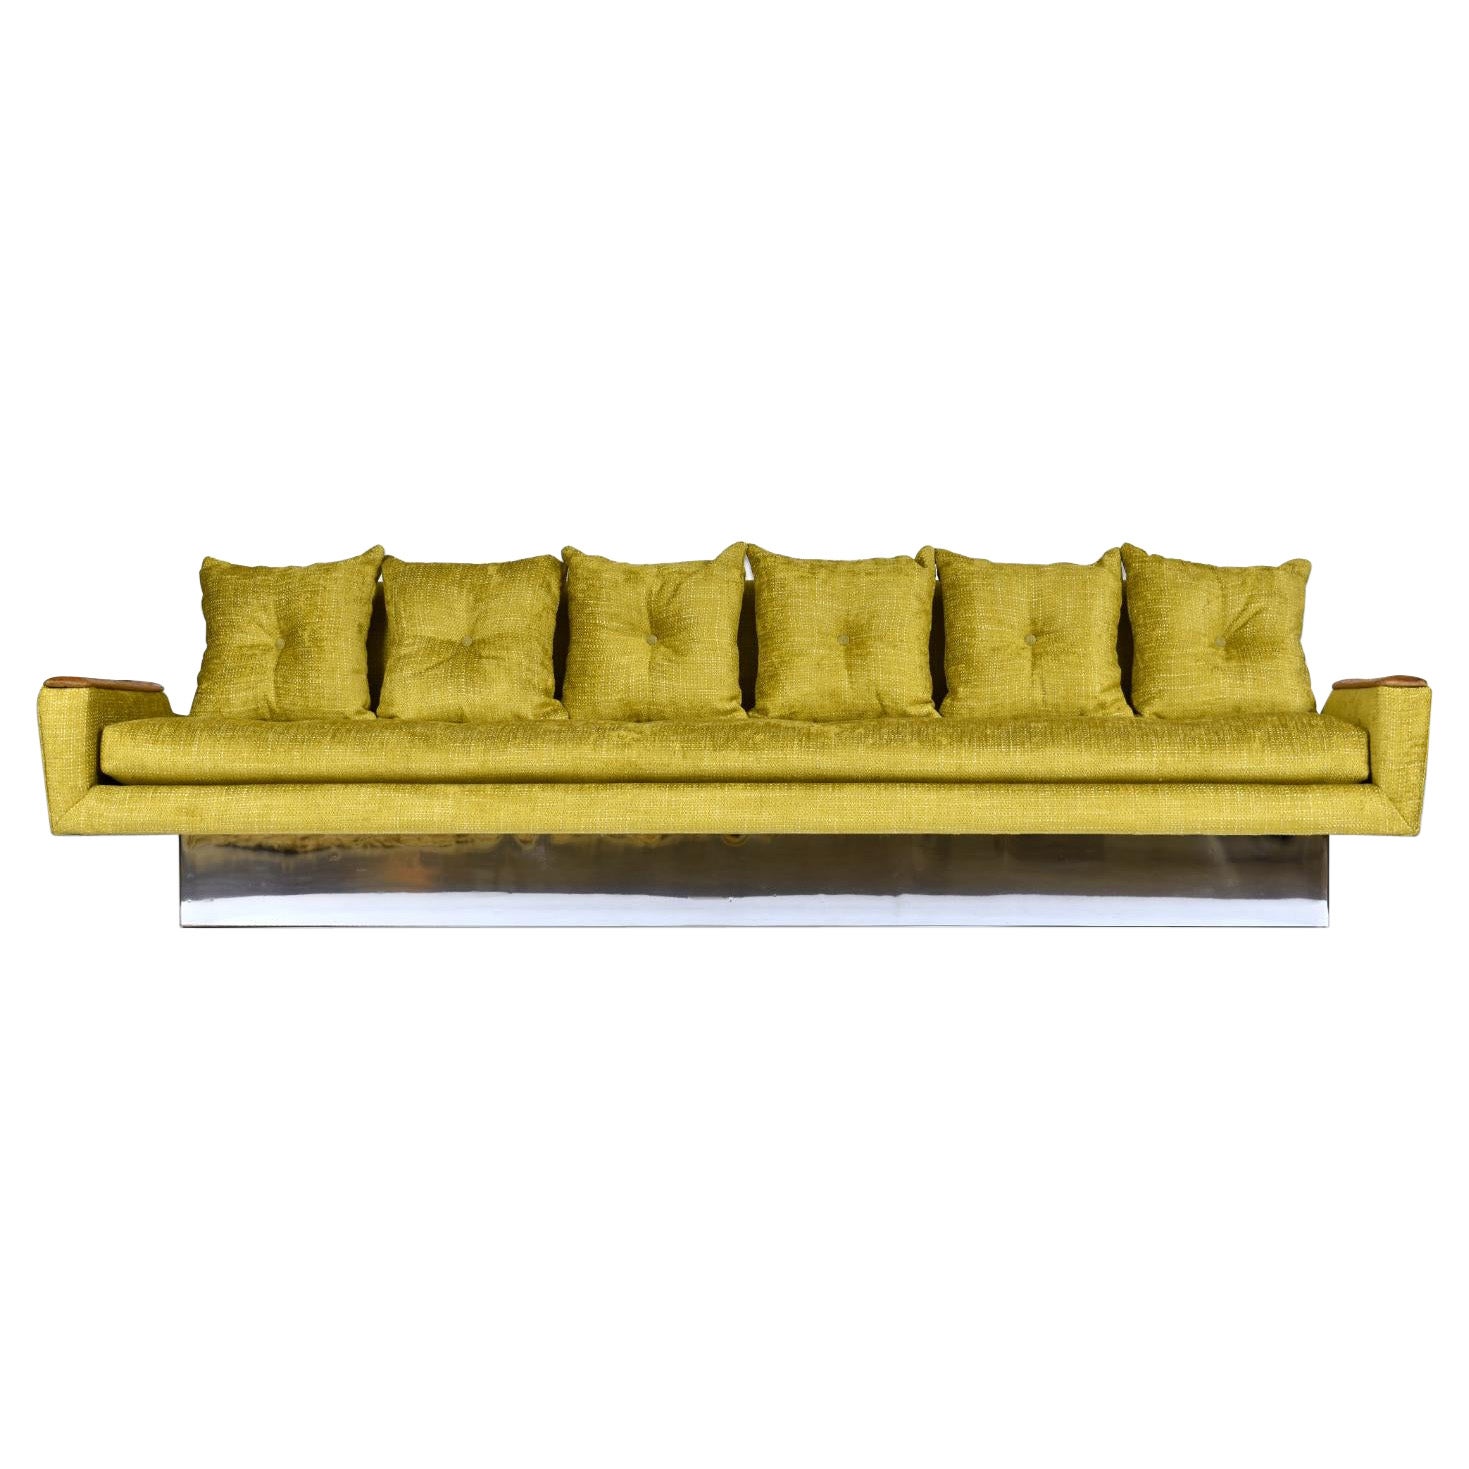 Restored Custom-Made Pearsall Style Gondola Sofa Couch on Mirrored Base